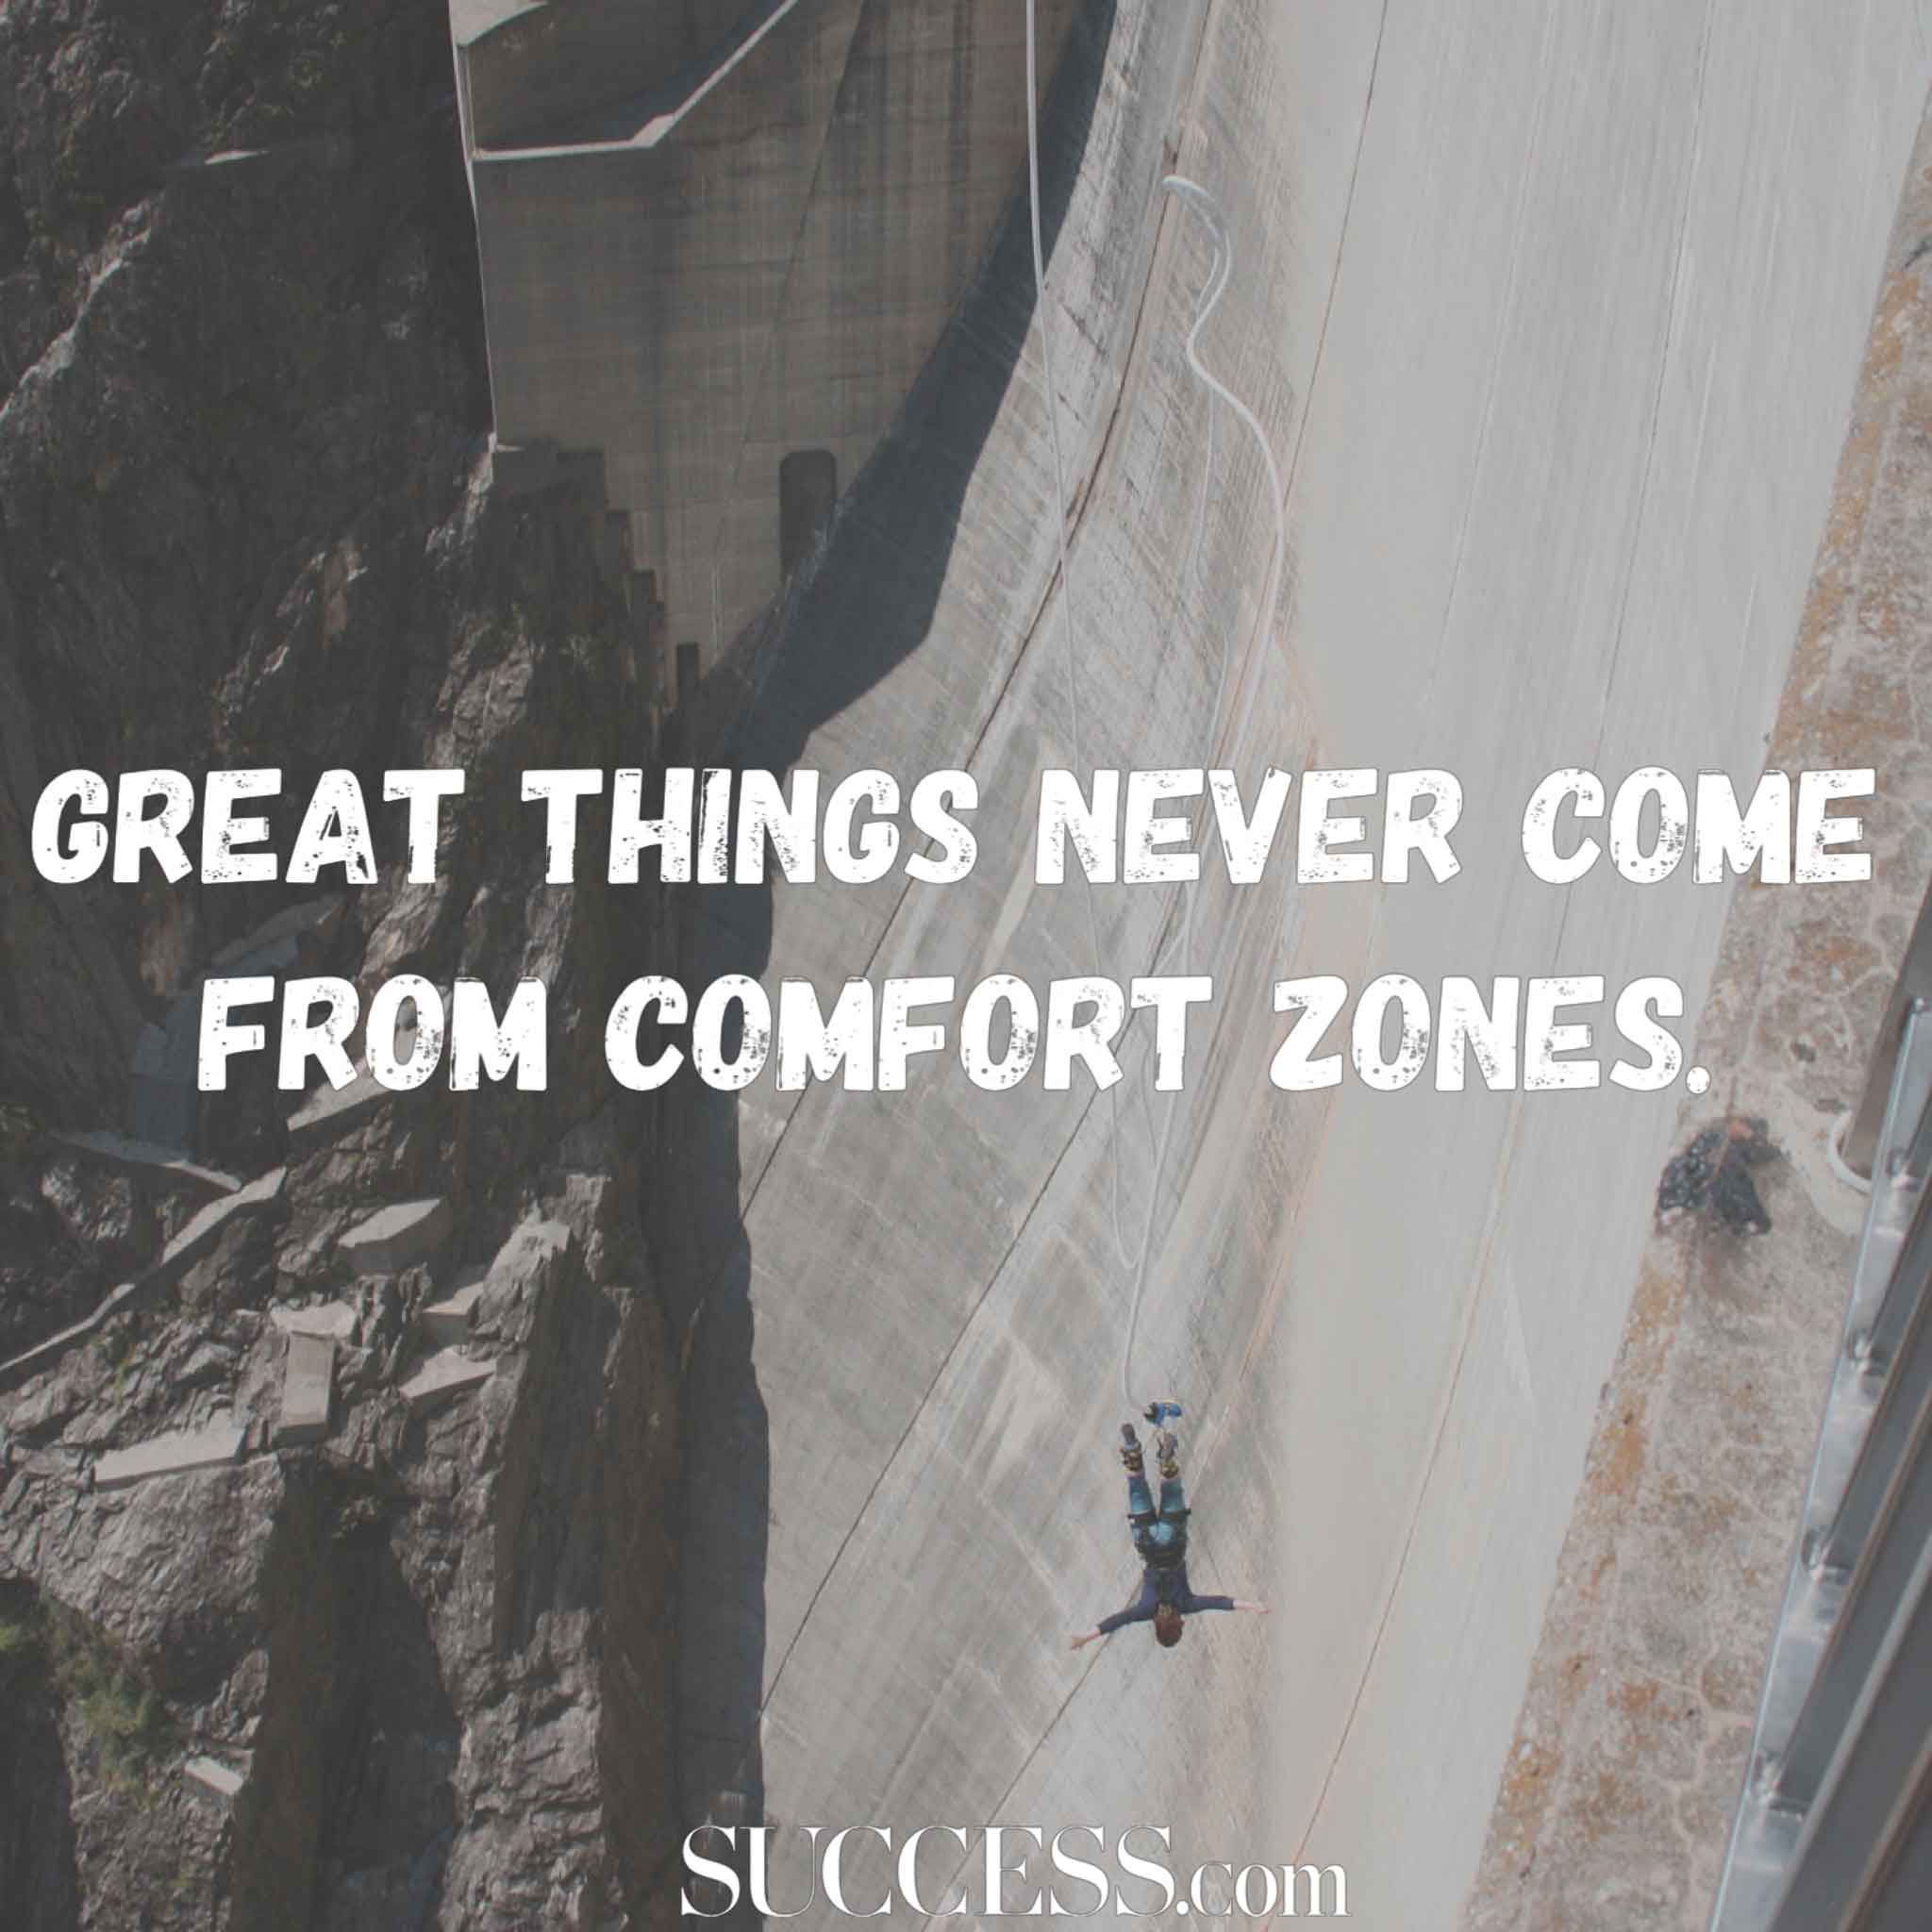 17 Motivational Quotes to Inspire You to Be Successful